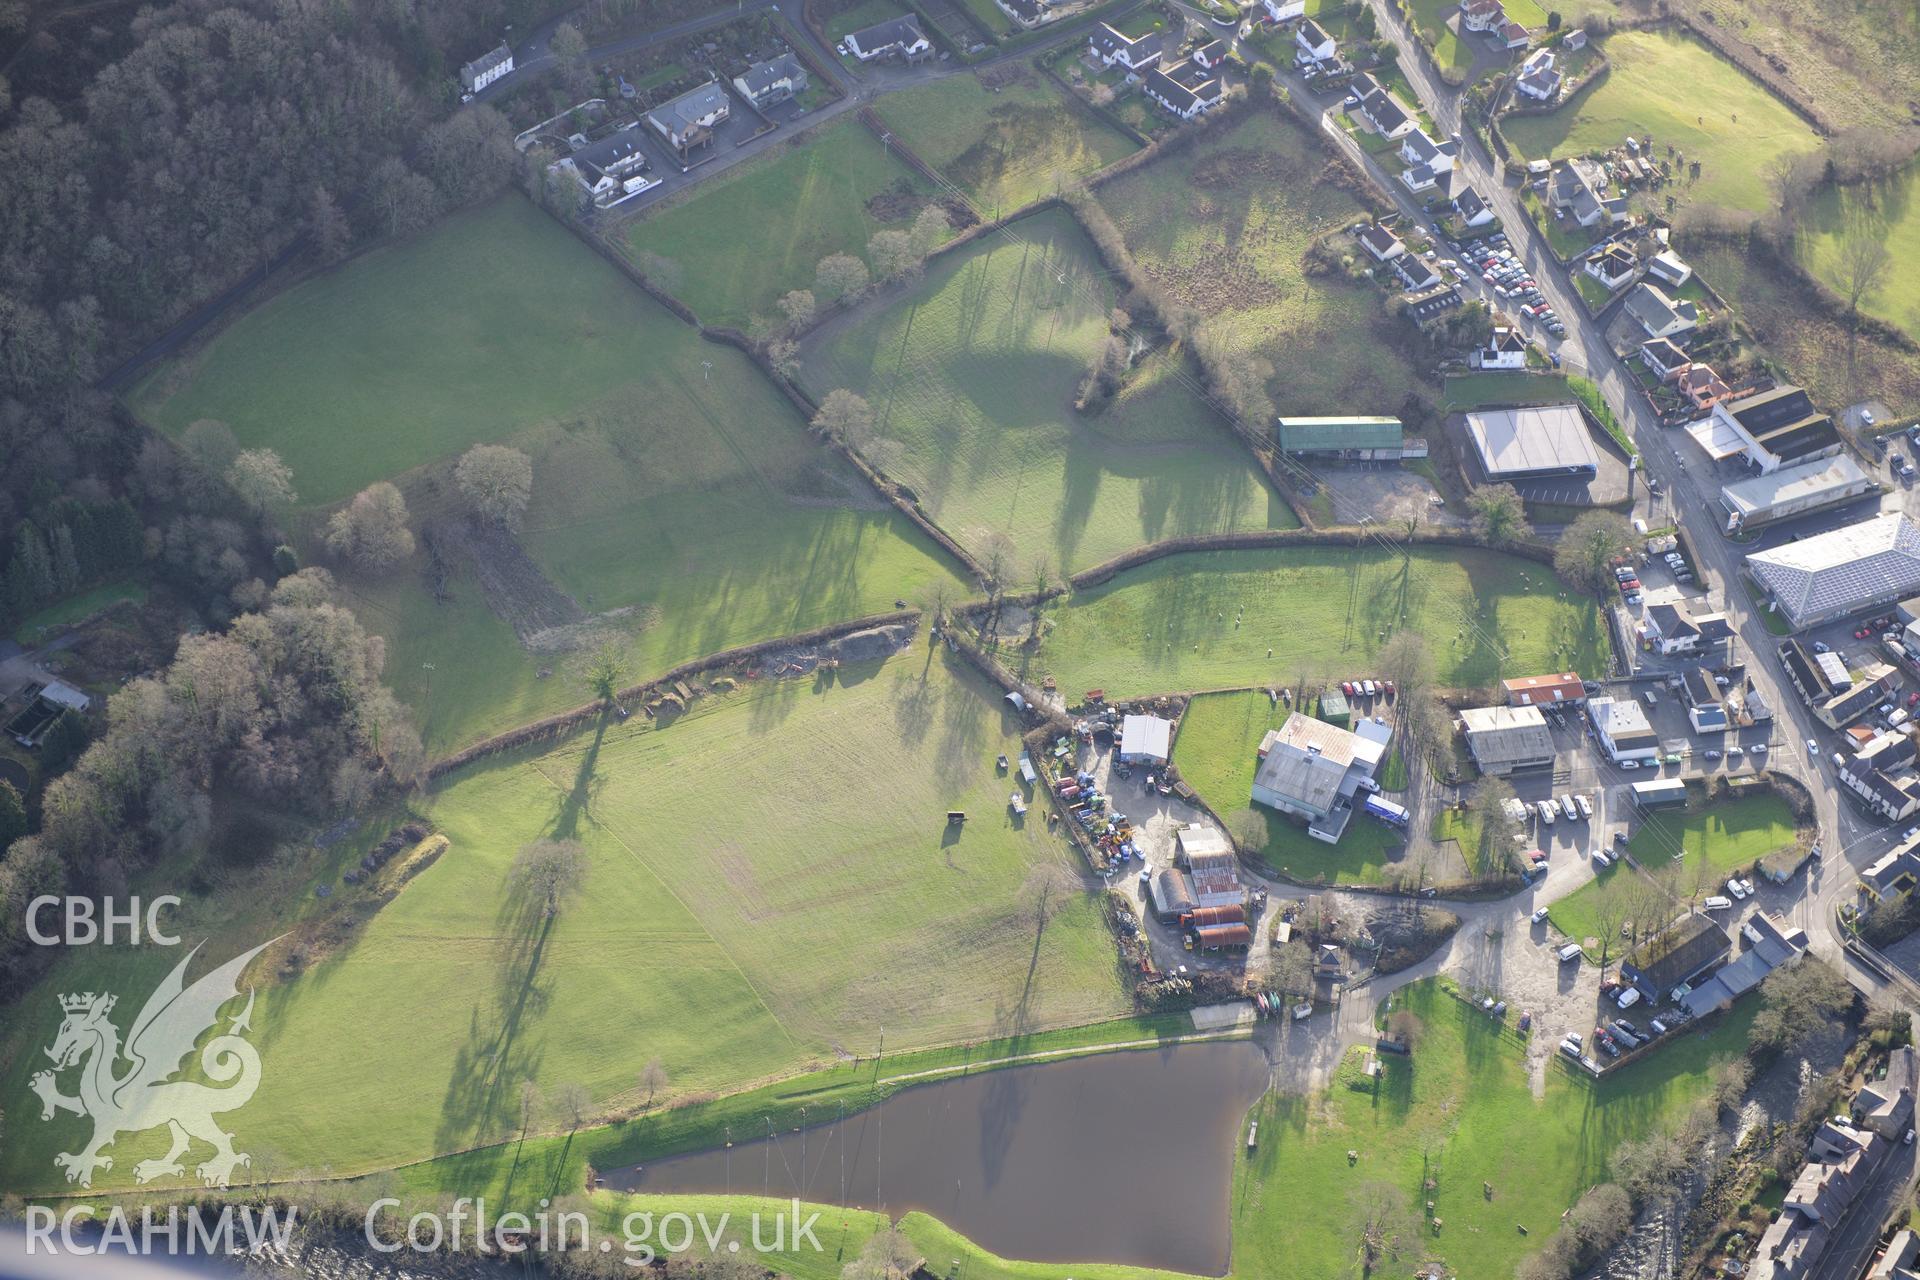 Seion Chapel and St. Tysul's Church, Llandysul. Oblique aerial photograph taken during the Royal Commission's programme of archaeological aerial reconnaissance by Toby Driver on 6th January 2015.